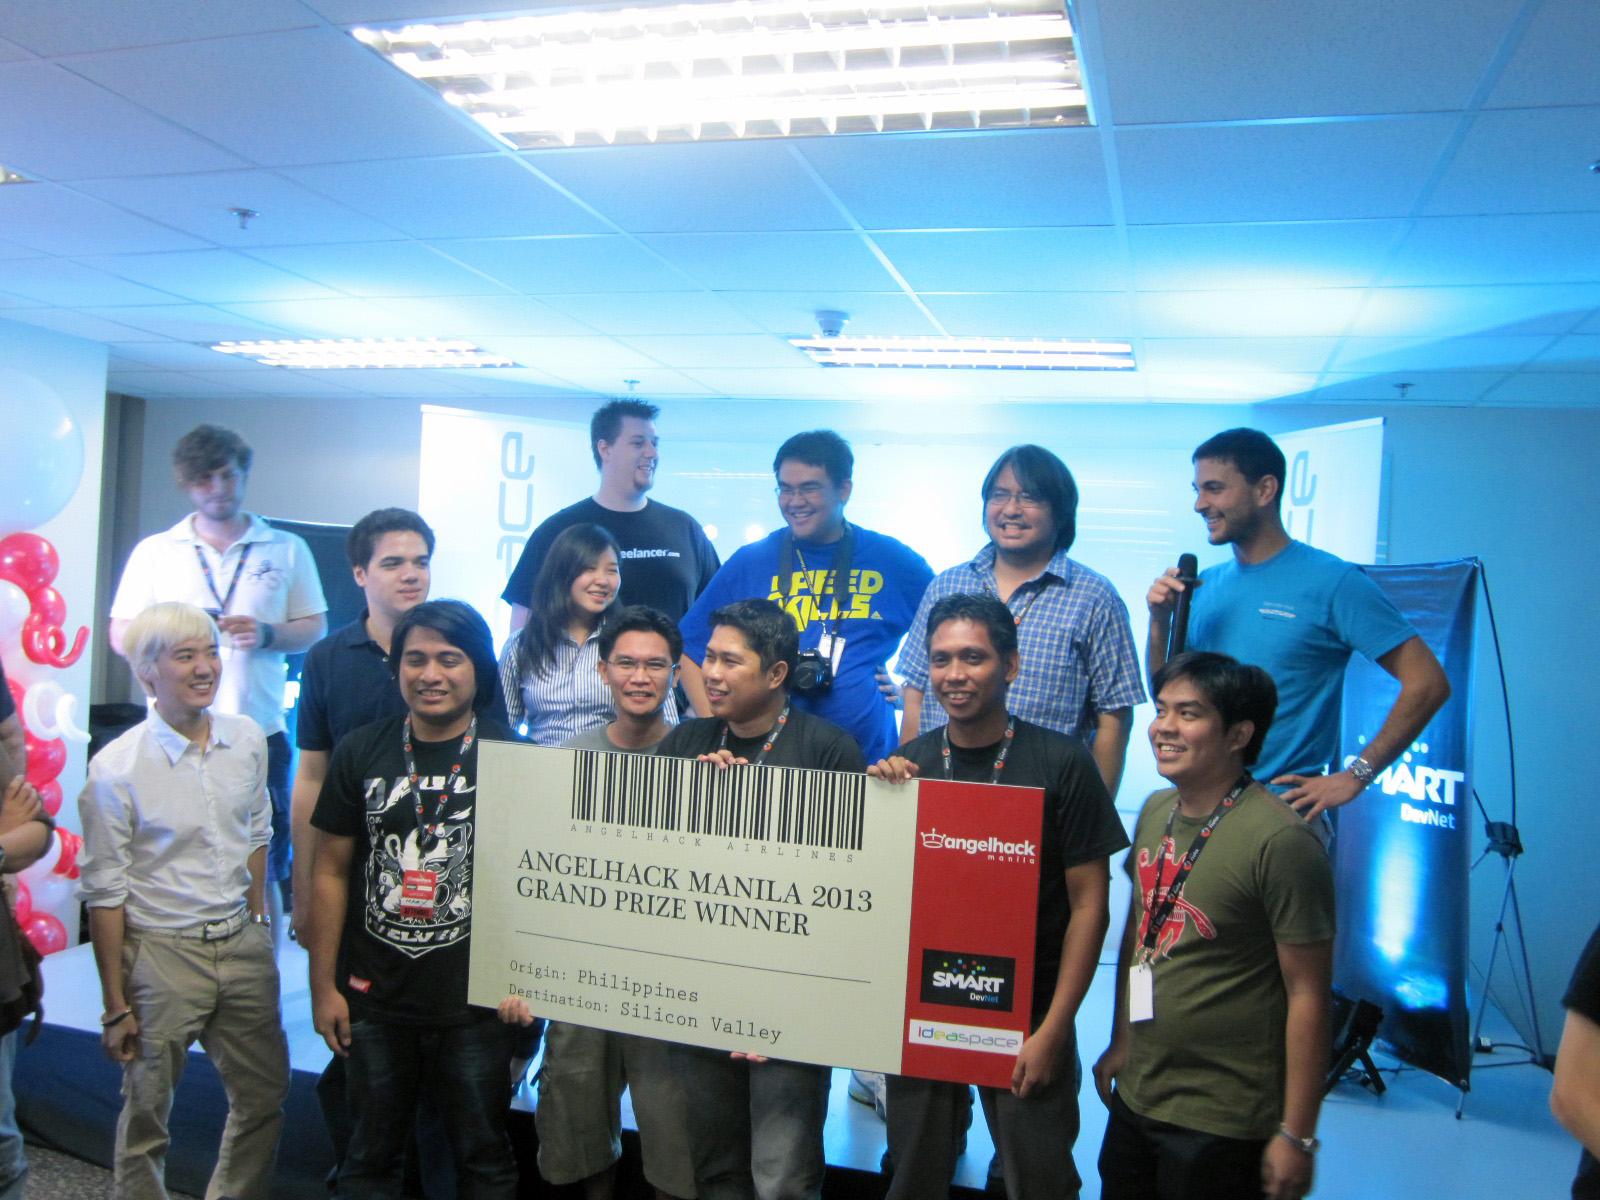 Pagesnapp Won the AngelHack MNL 2013